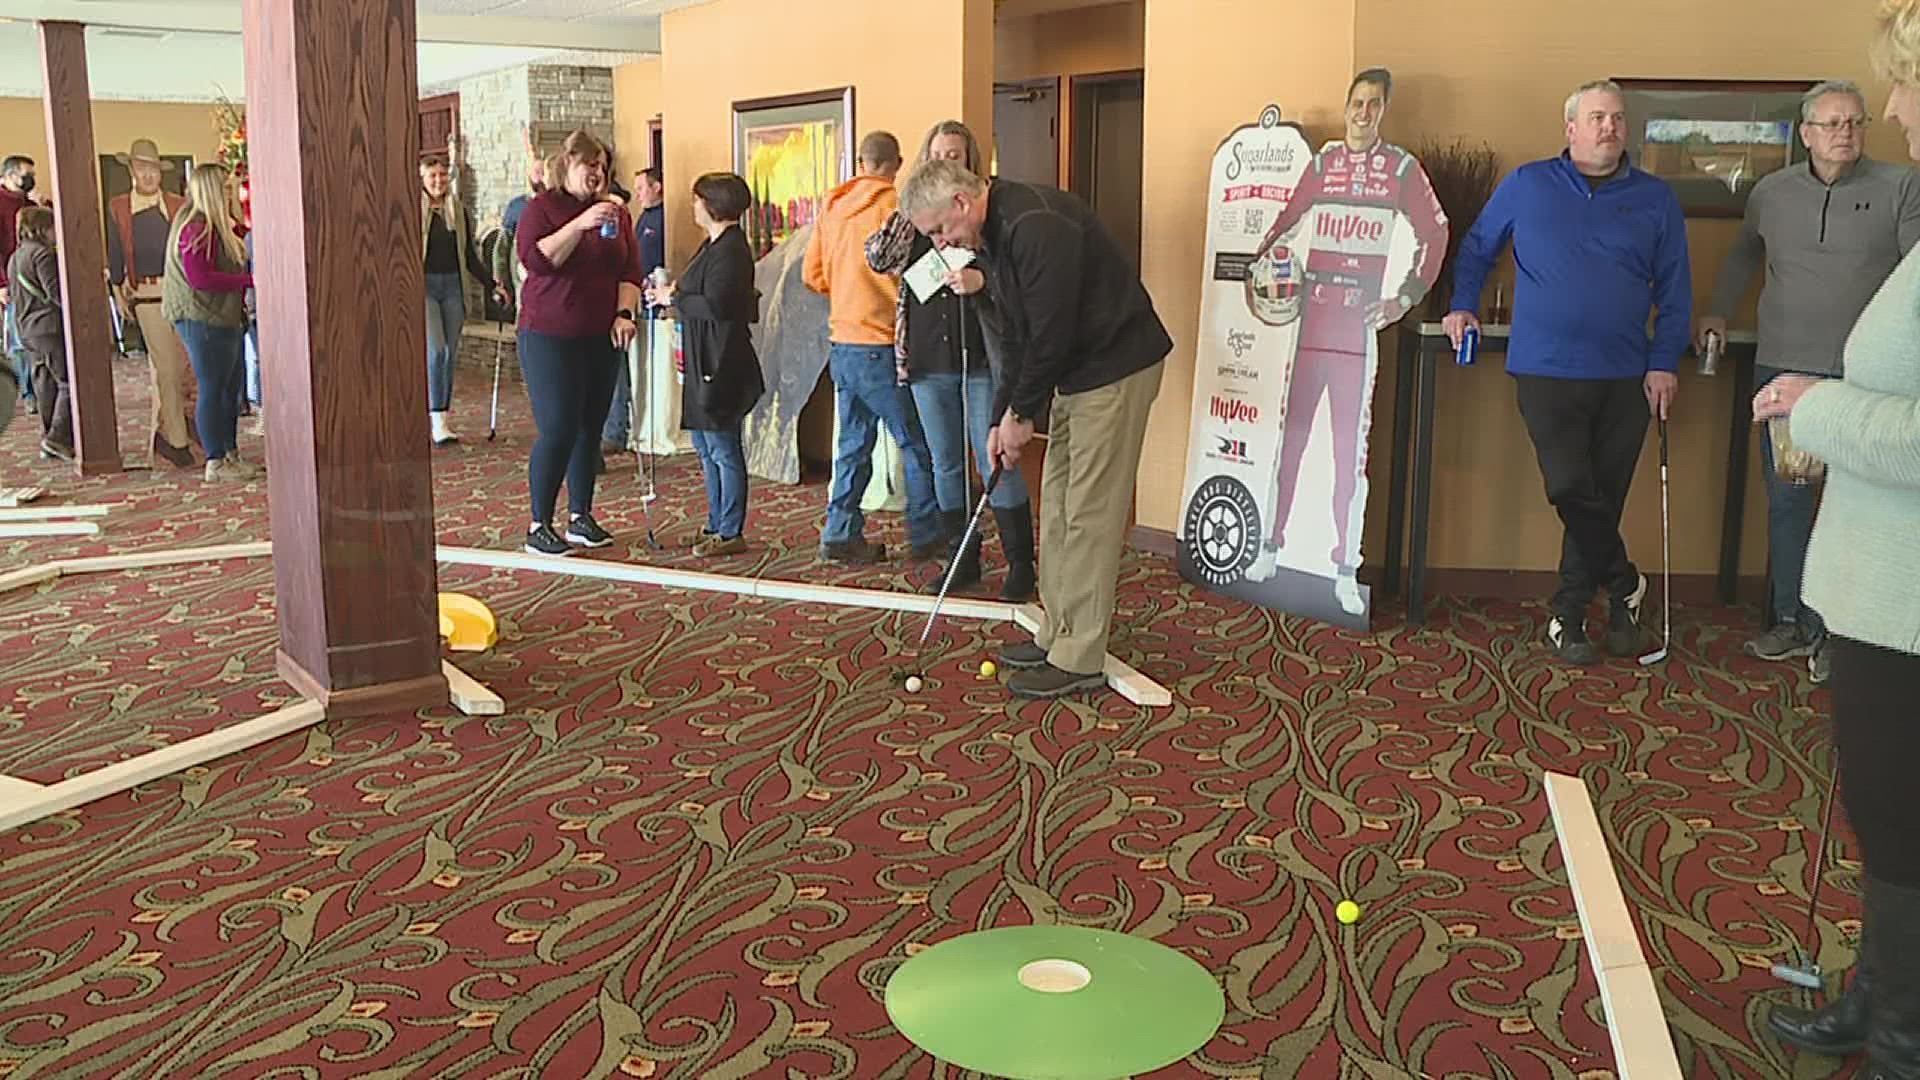 Over 300 people participated in the 20th annual Tudi's Tribe putt putt on Saturday, Feb. 26.